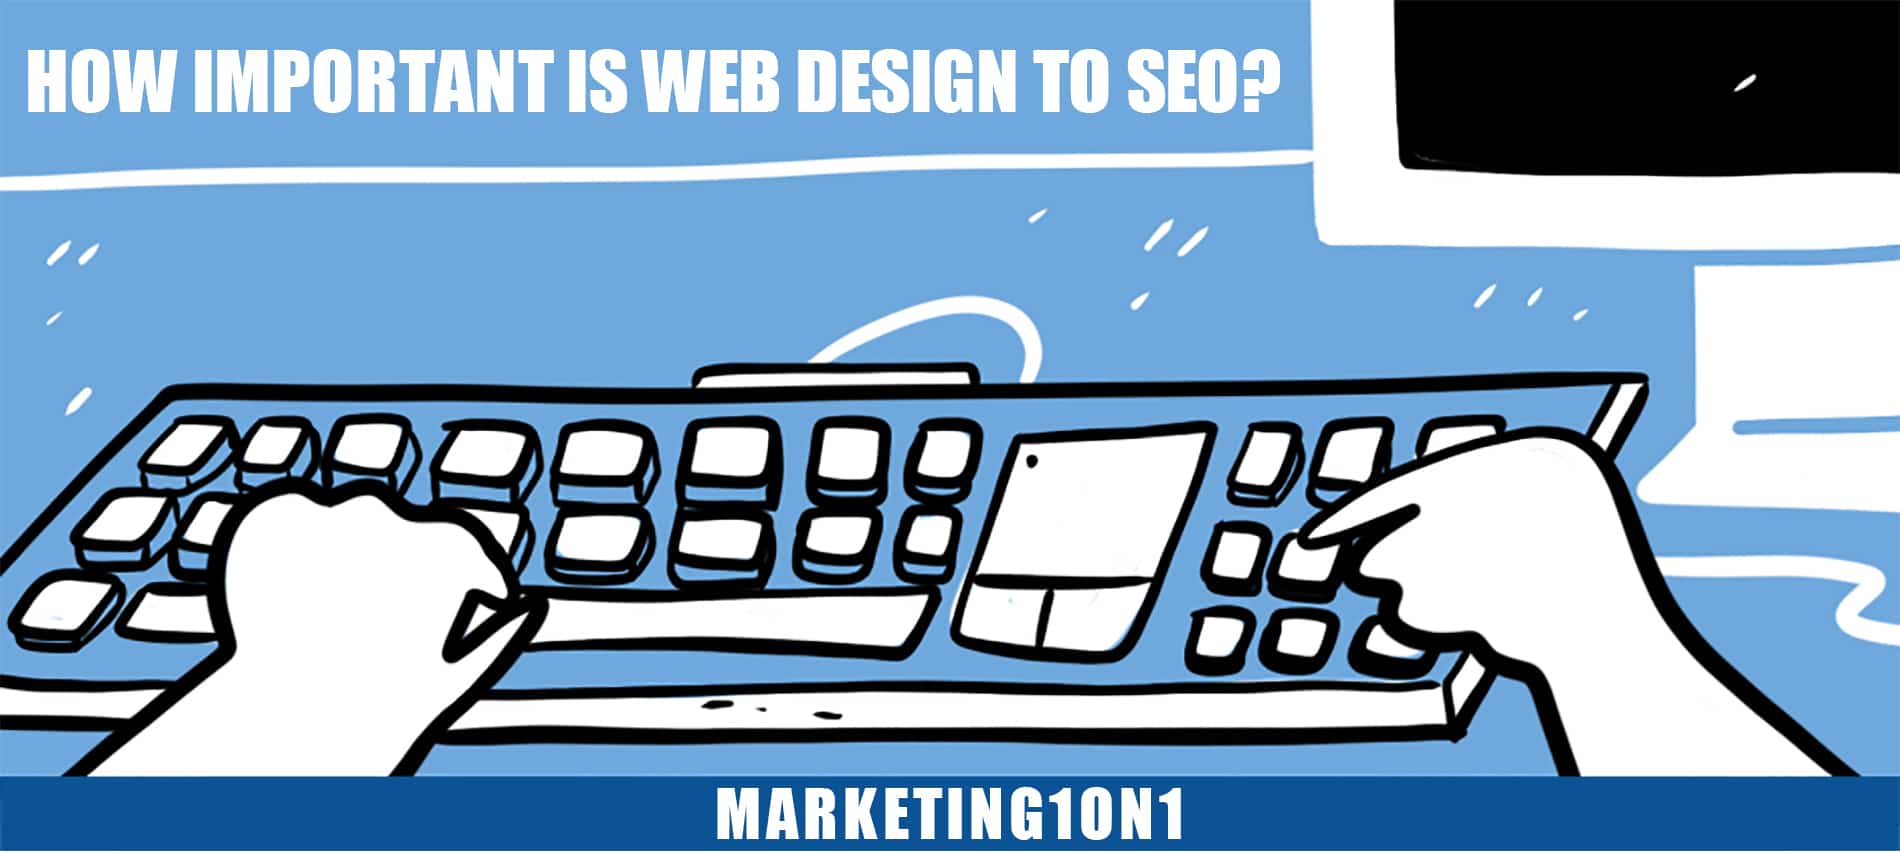 How important is web design to SEO?